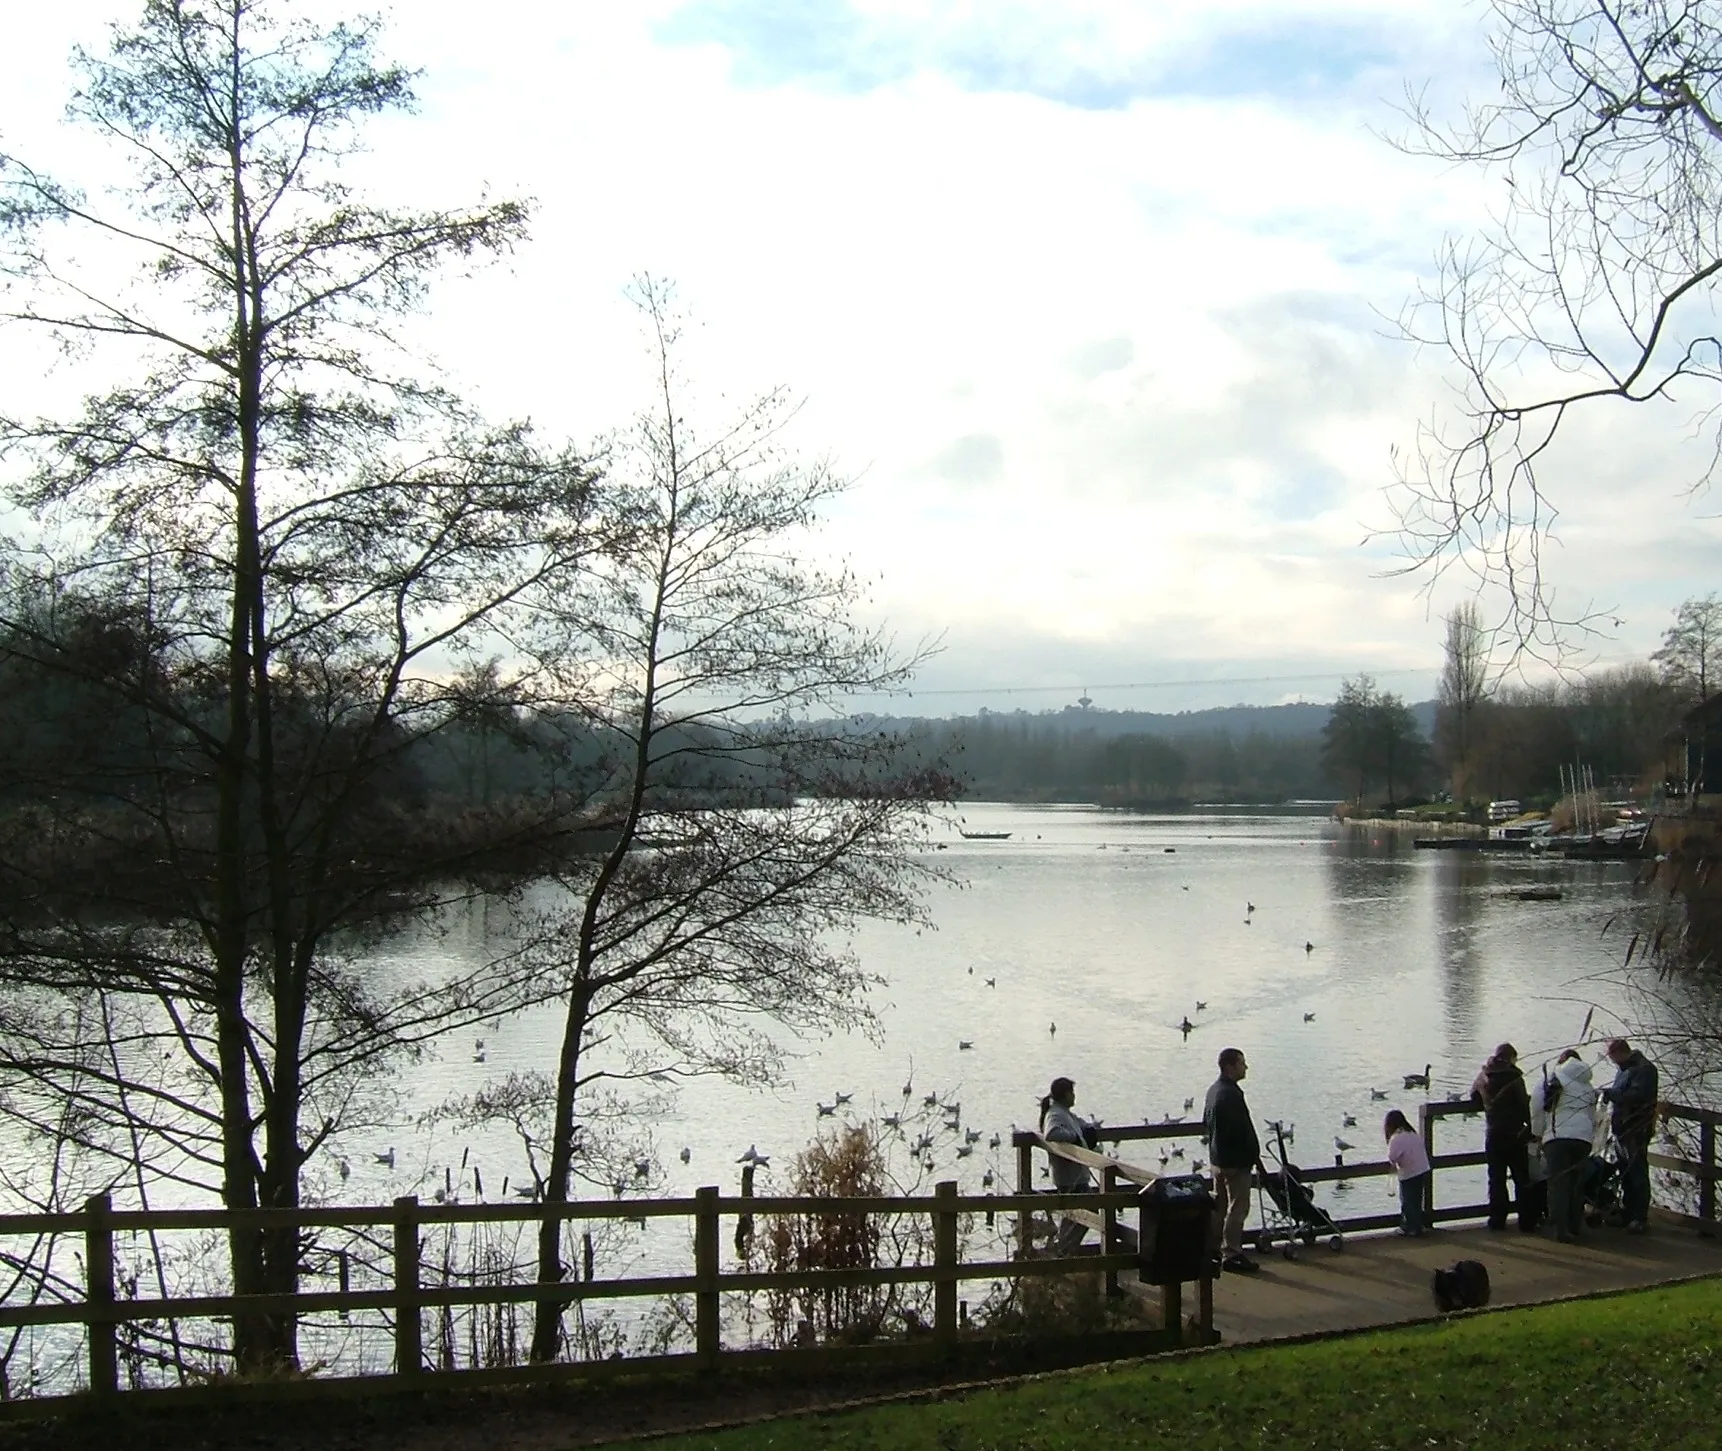 Photo showing: Arrow Valley Lake in Arrow Valley Park, Redditch, Worcestershire.  Taken by DKJackson in December 2005.  The Redditch Sailing Club building is visible on the right.  The water tower in Headless Cross is visible on the horizon - this is a familiar Redditch landmark visible around the town.